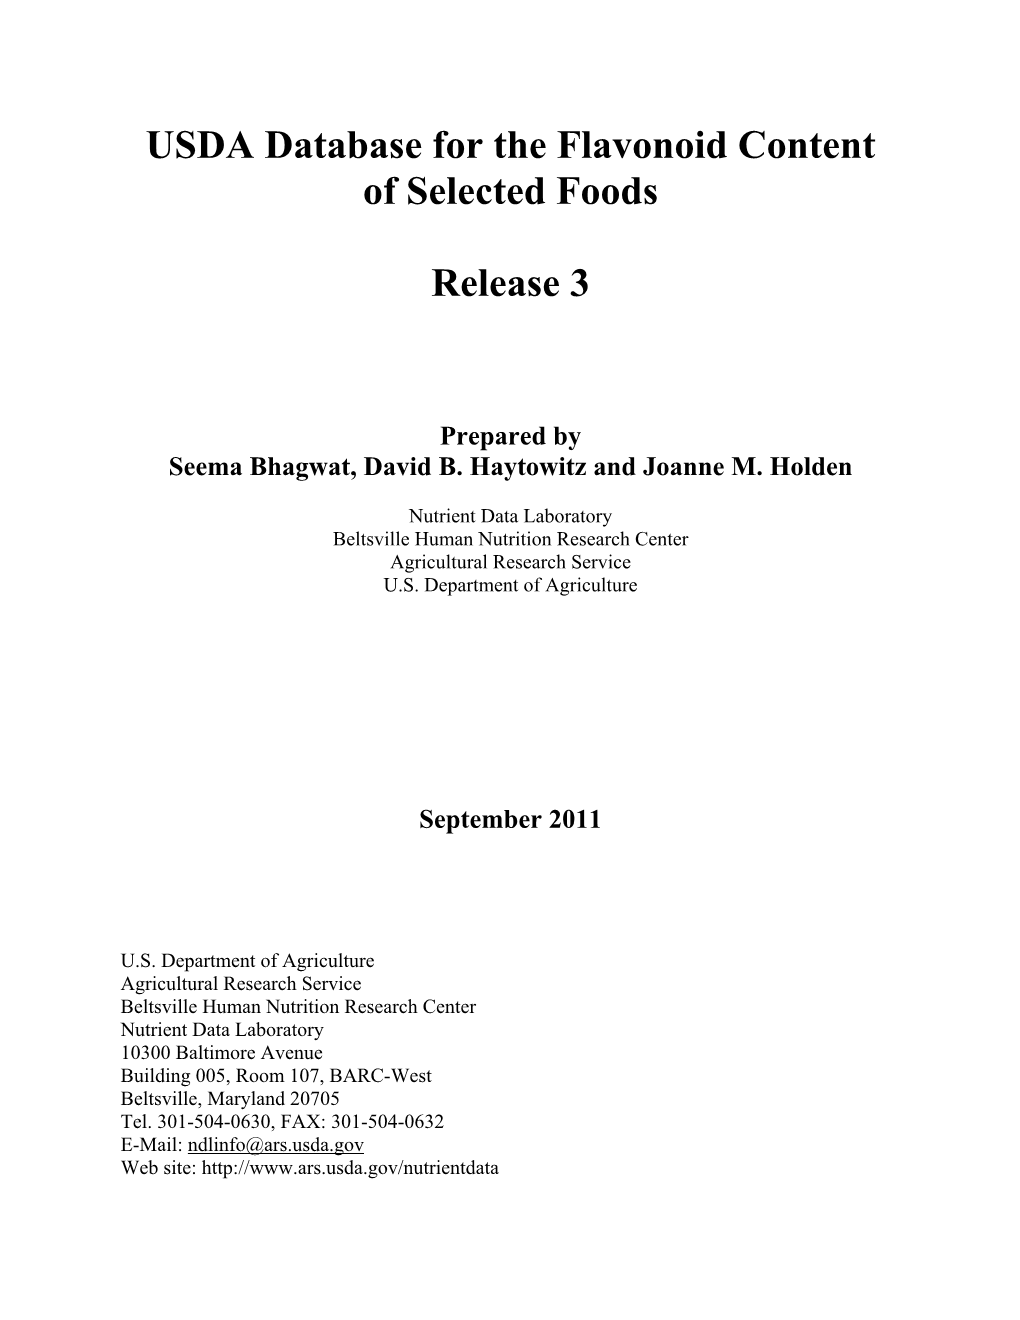 USDA Database for the Flavonoid Content of Selected Foods